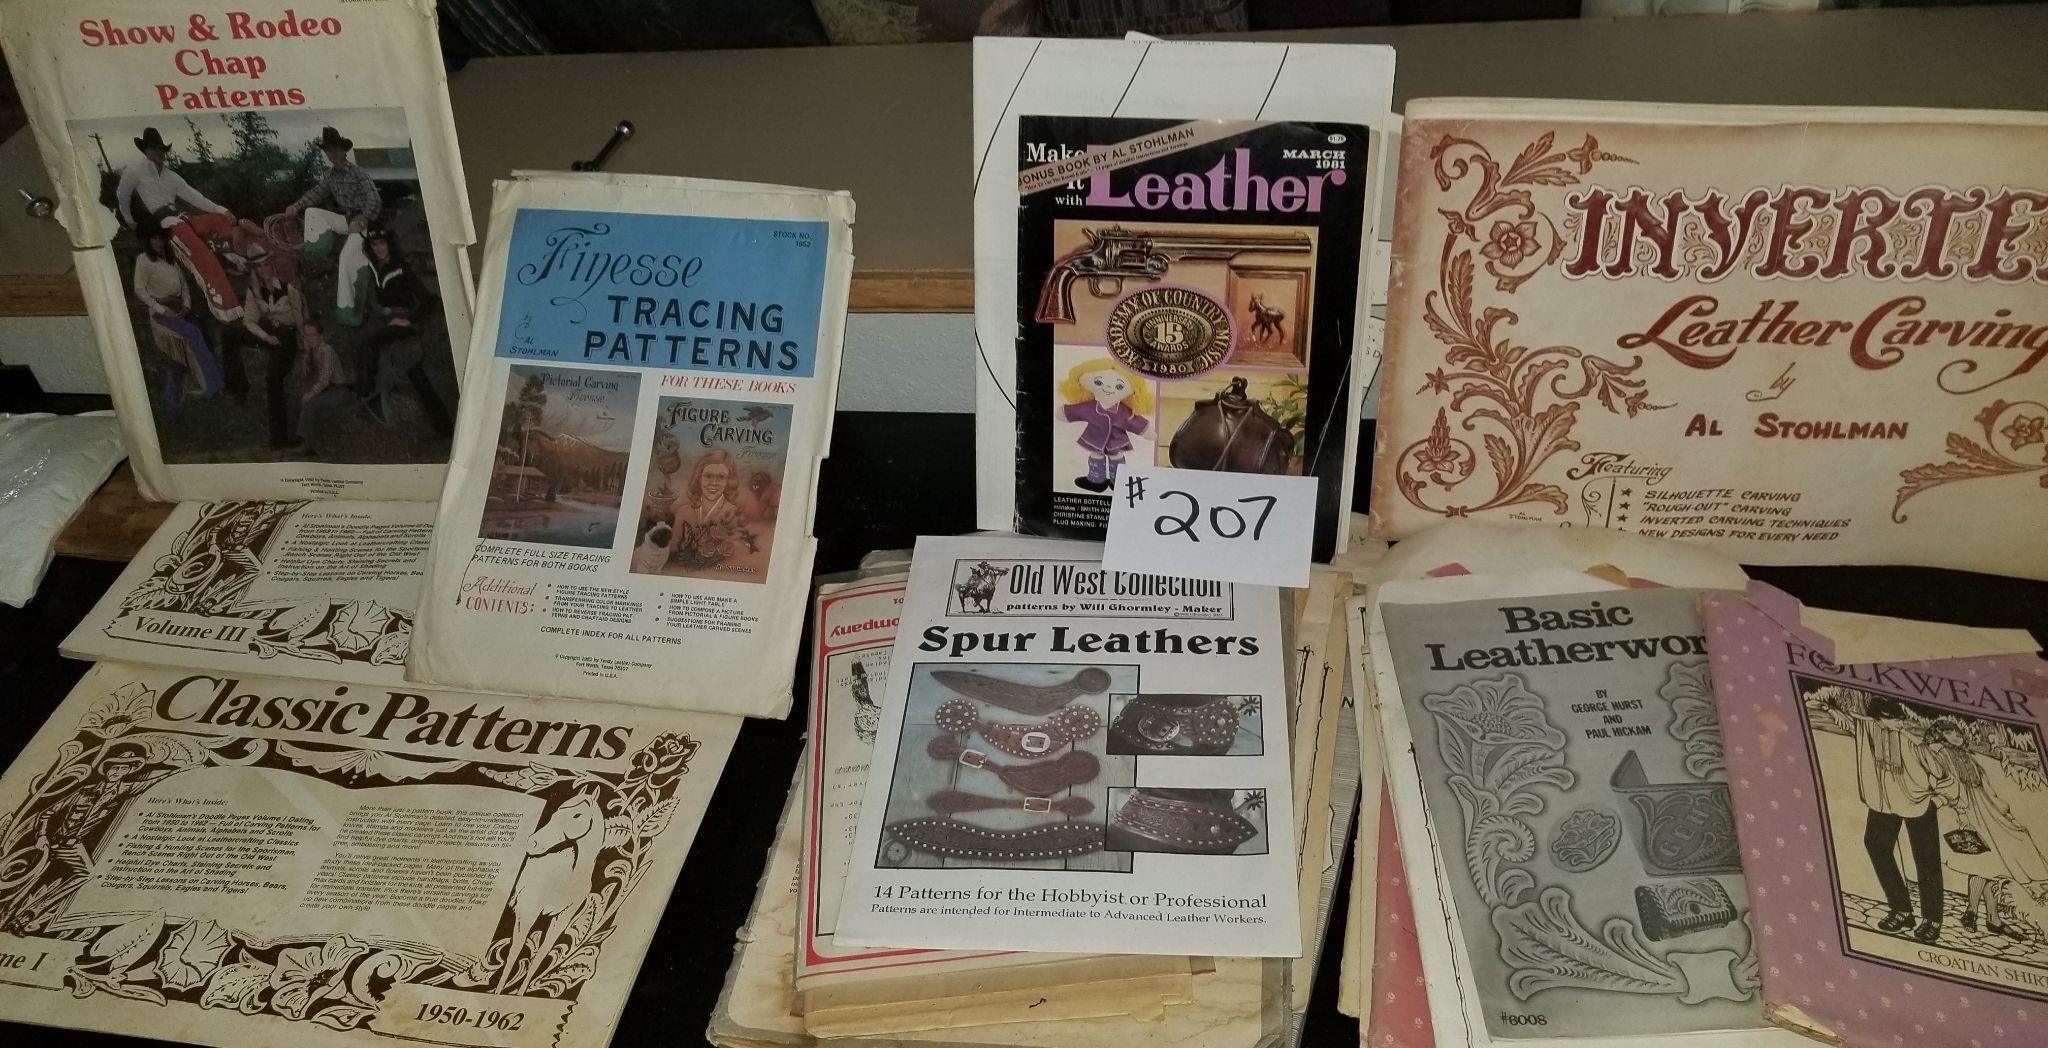 Classic Patterns Books, Leather Patterns